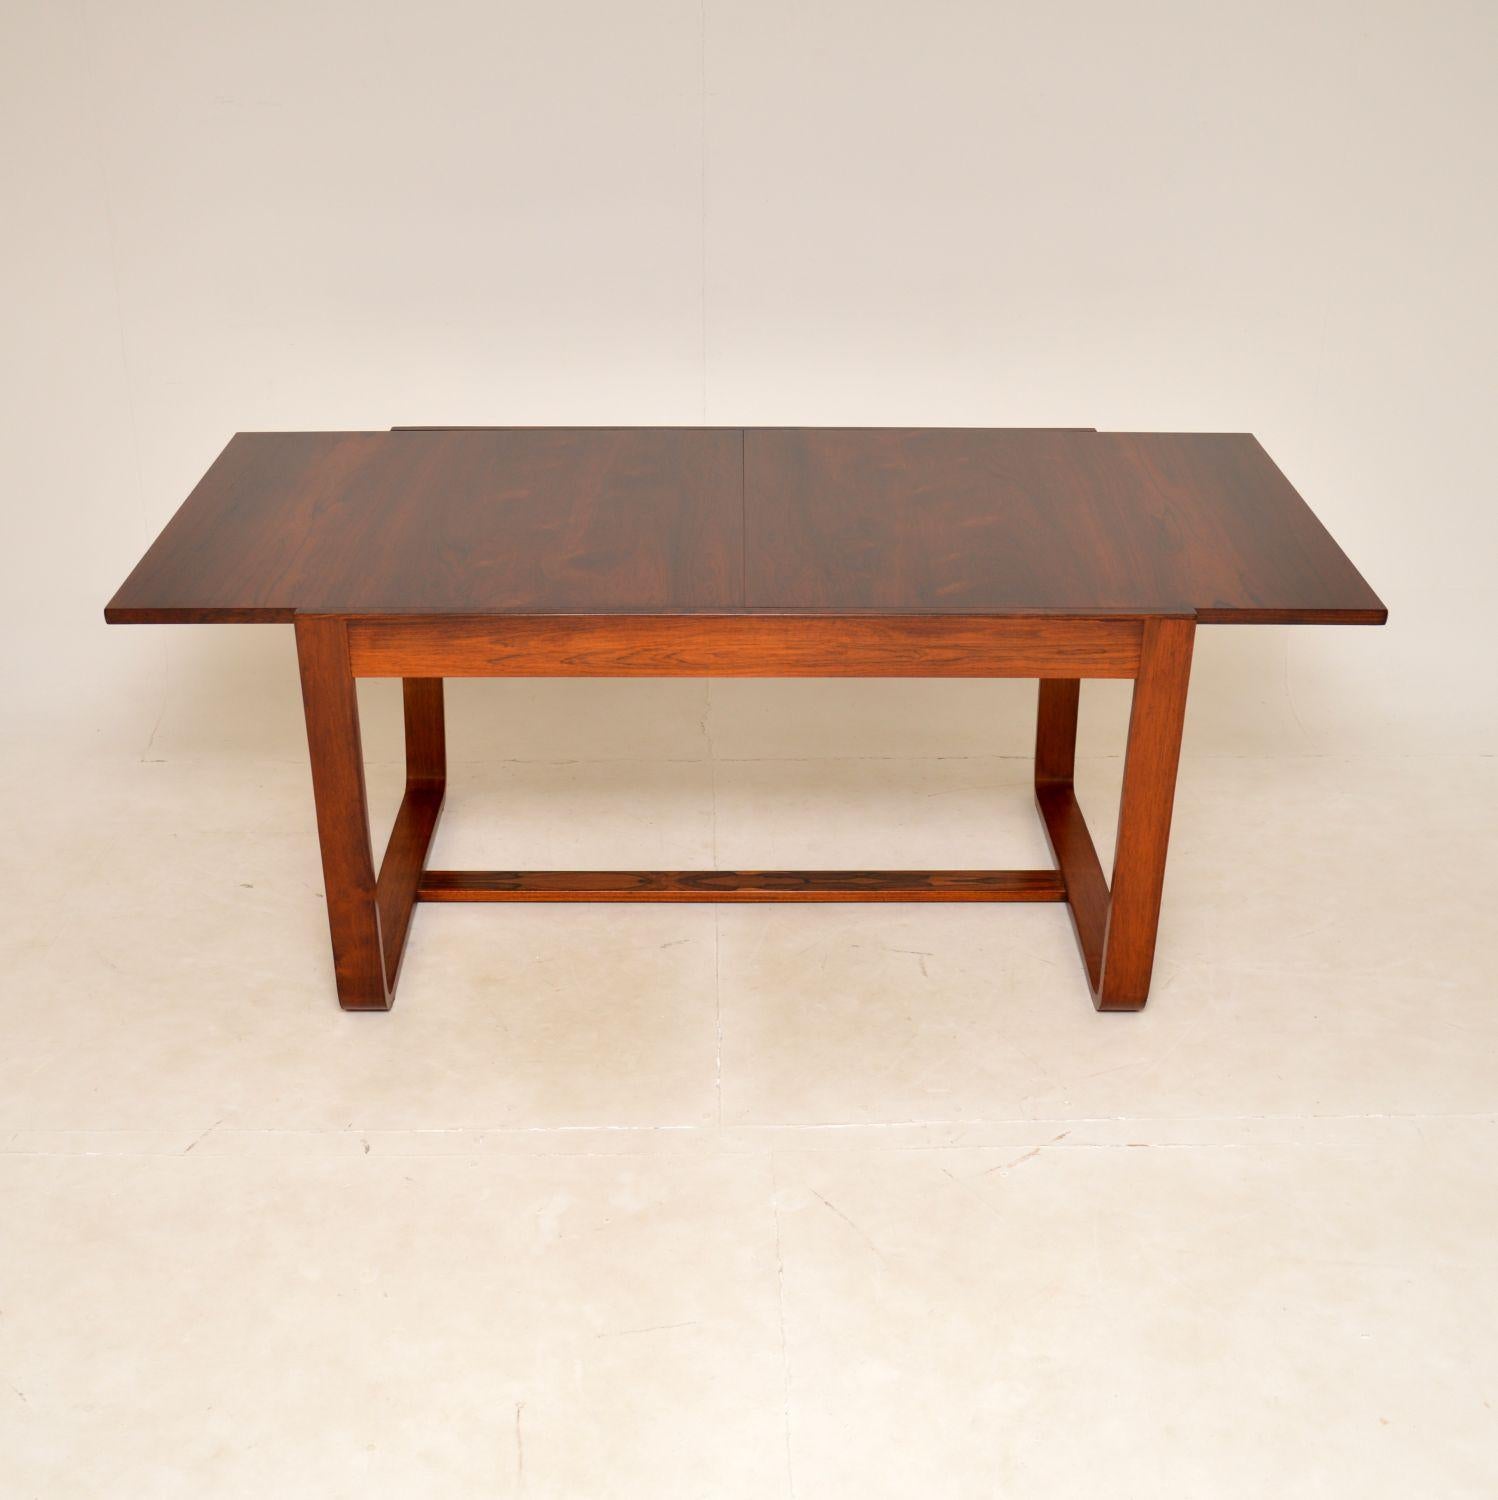 A beautiful and very stylish vintage dining table. This was designed by Gunther Hoffstead for Uniflex, it was made in England in the 1960’s.

This is of outstanding quality, it has a fantastic design with bentwood U shaped legs. There are stunning